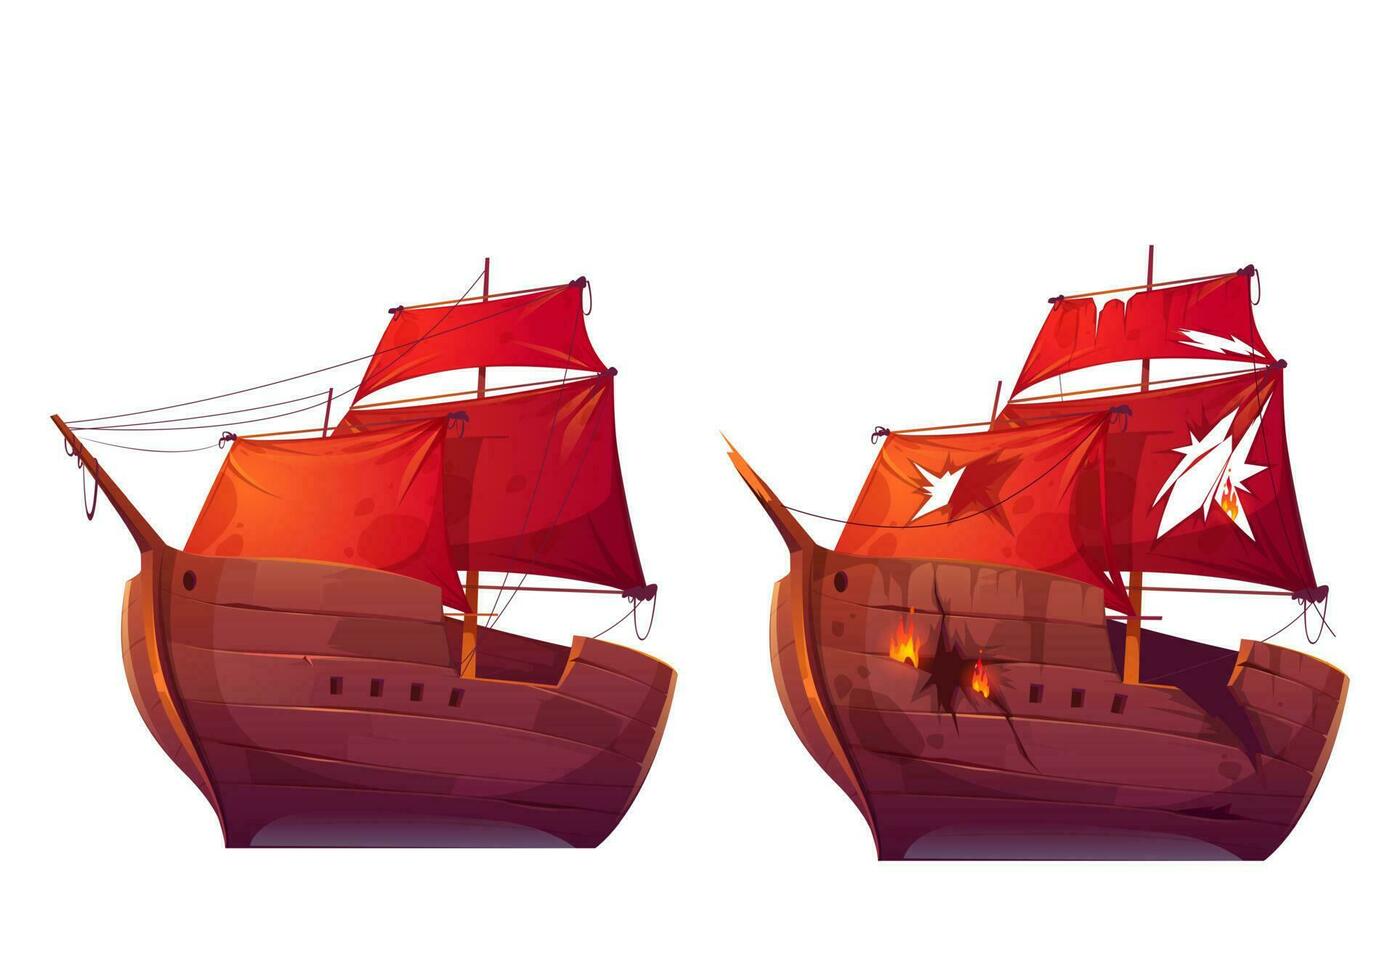 Retro wooden ships with red scarlet sail cartoon vector